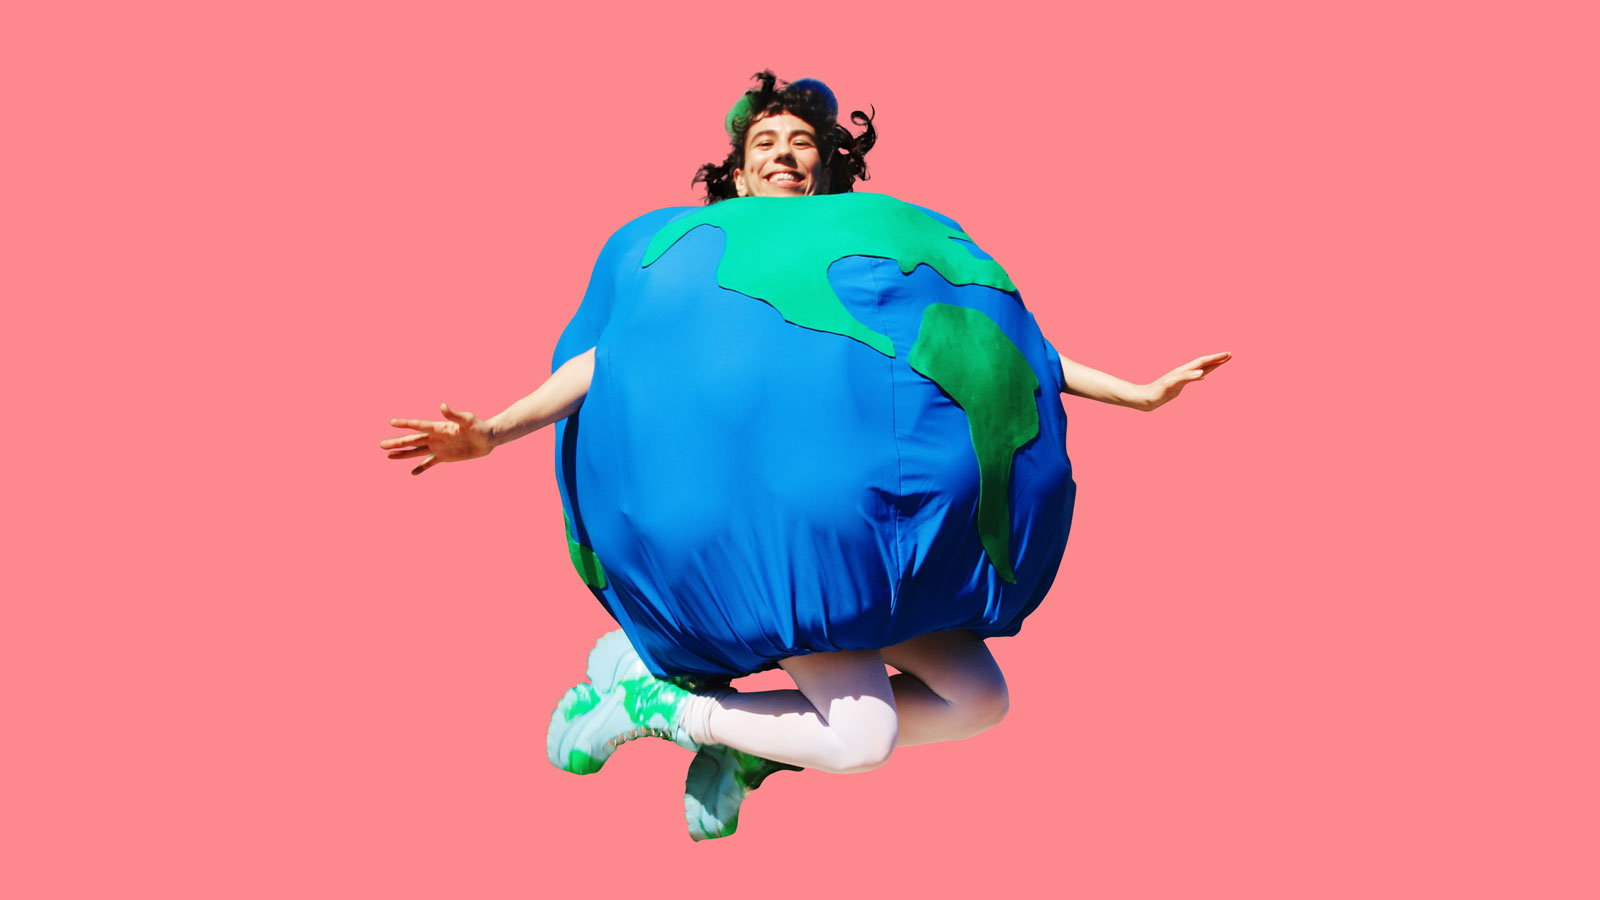 Hila dressed as the earth jumping against pink background